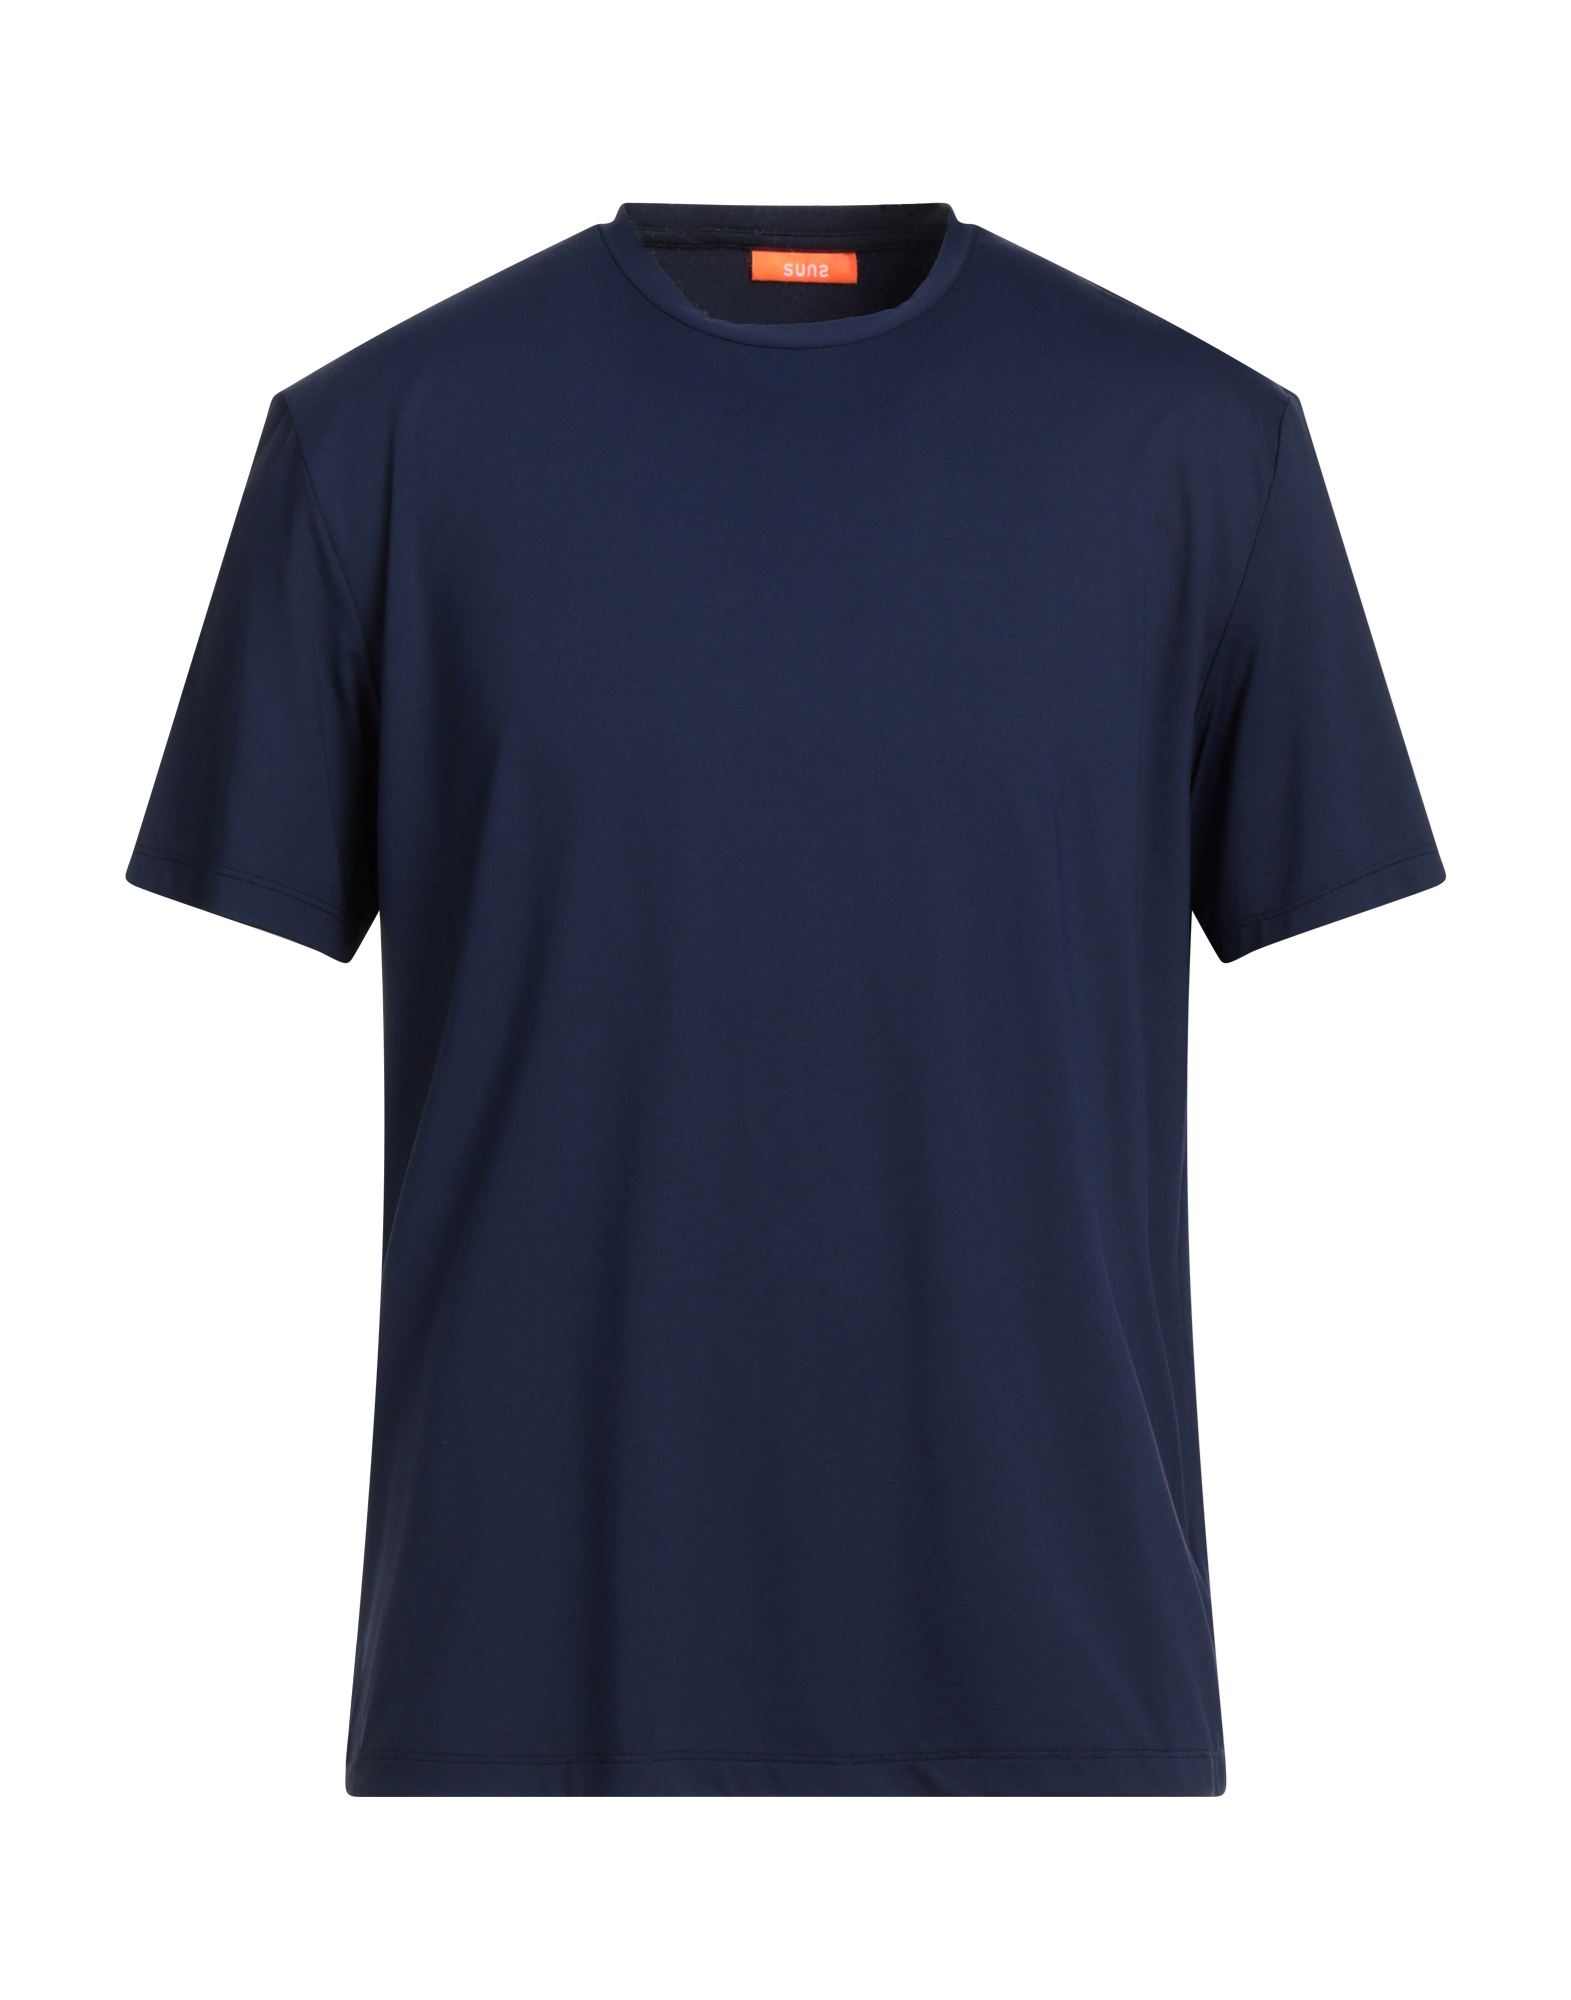 Suns T-shirts In Navy Blue